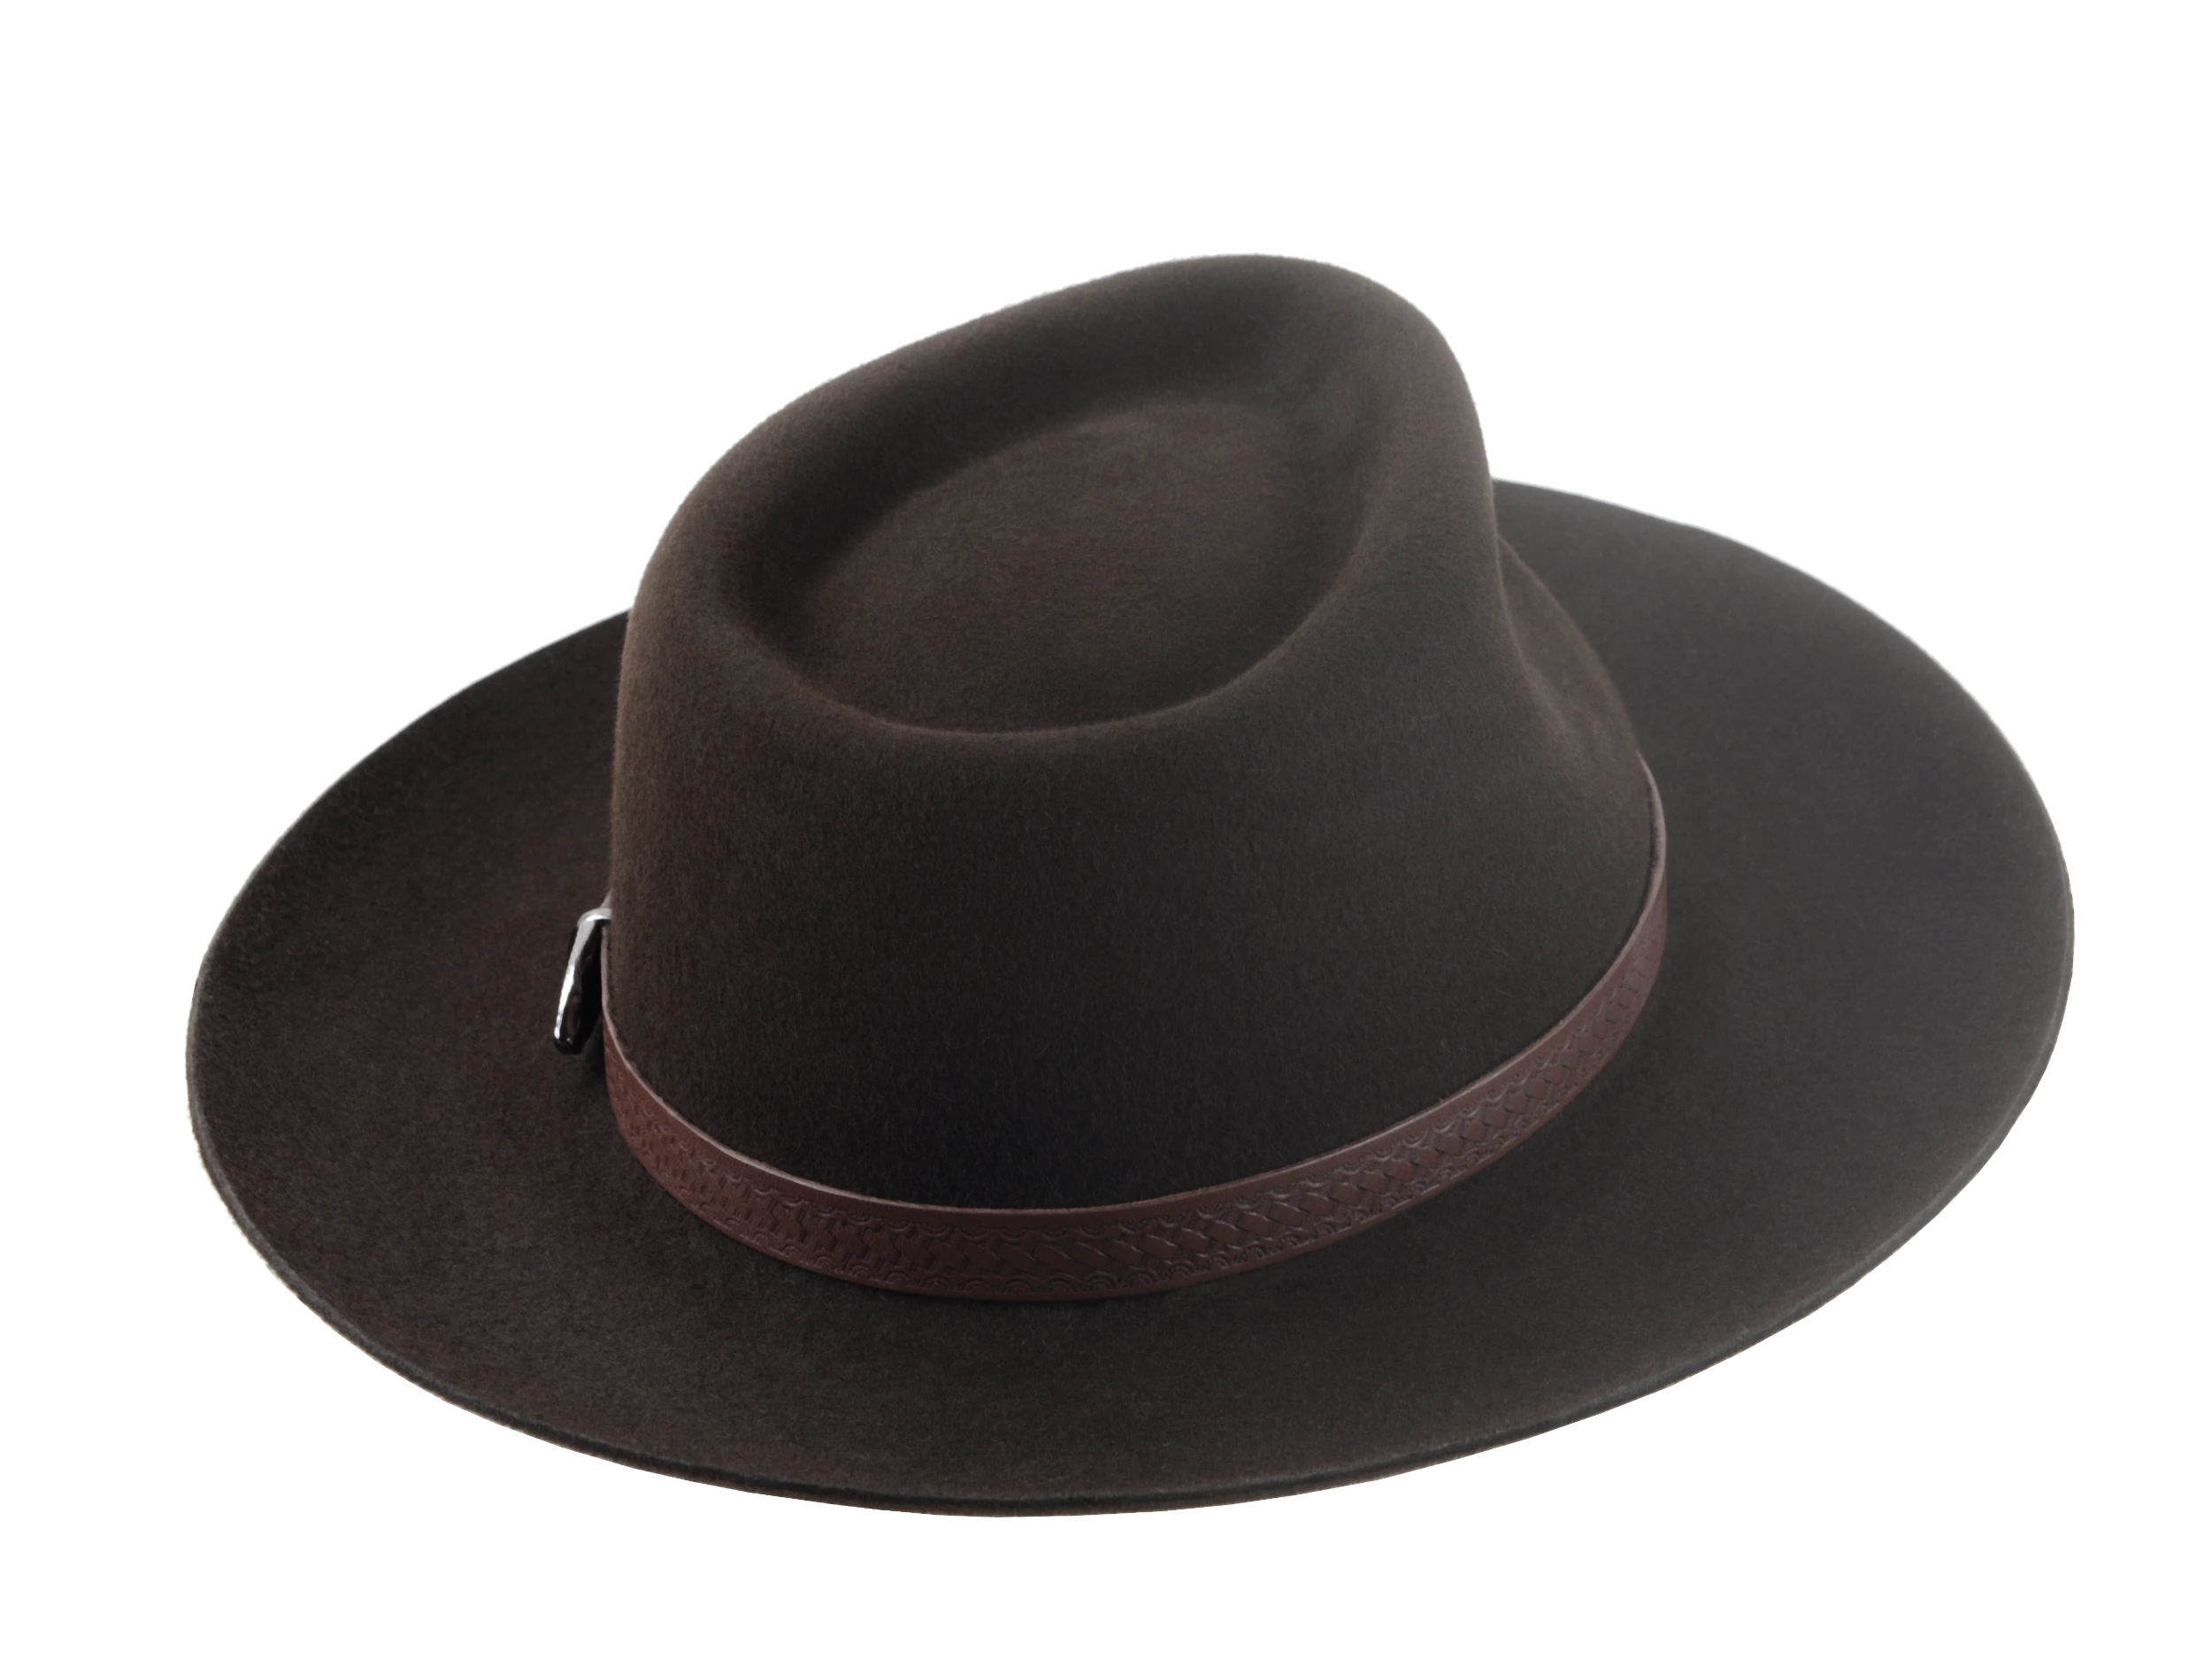 The Magnet: Profile angle showing the 4 1/4" crown height and elegant silhouette | Agnoulita Hats